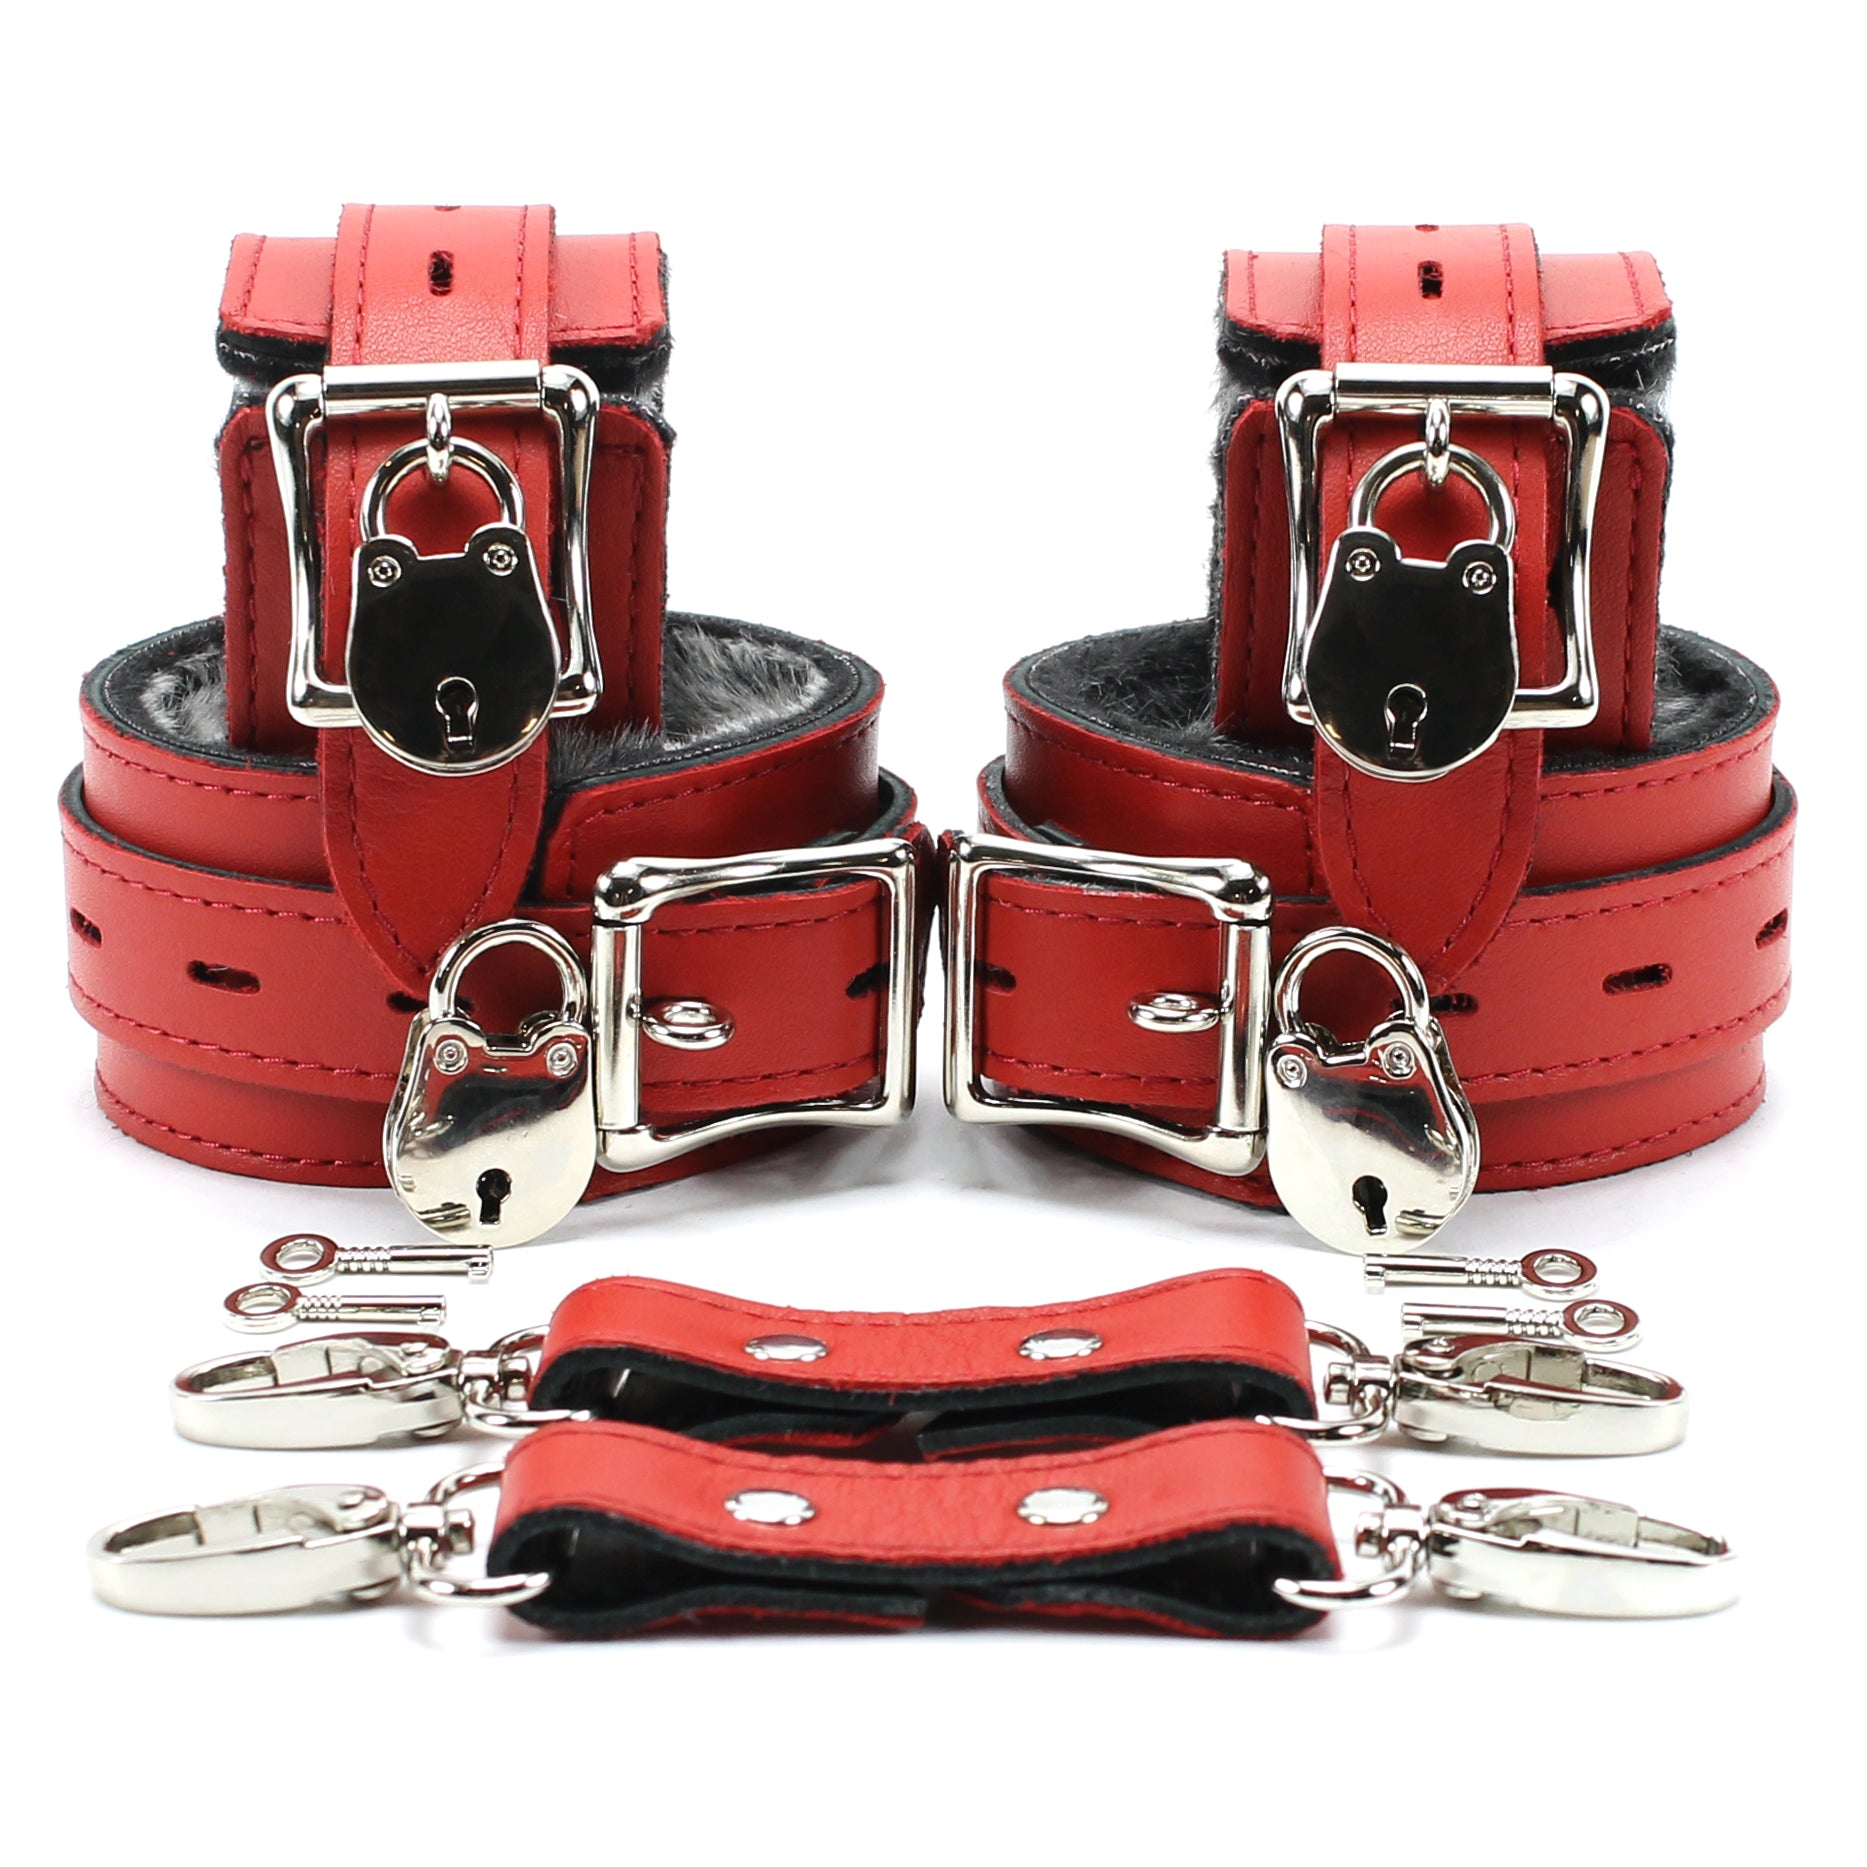 Berlin Locking Faux Fur Lined Leather BDSM Cuffs Red